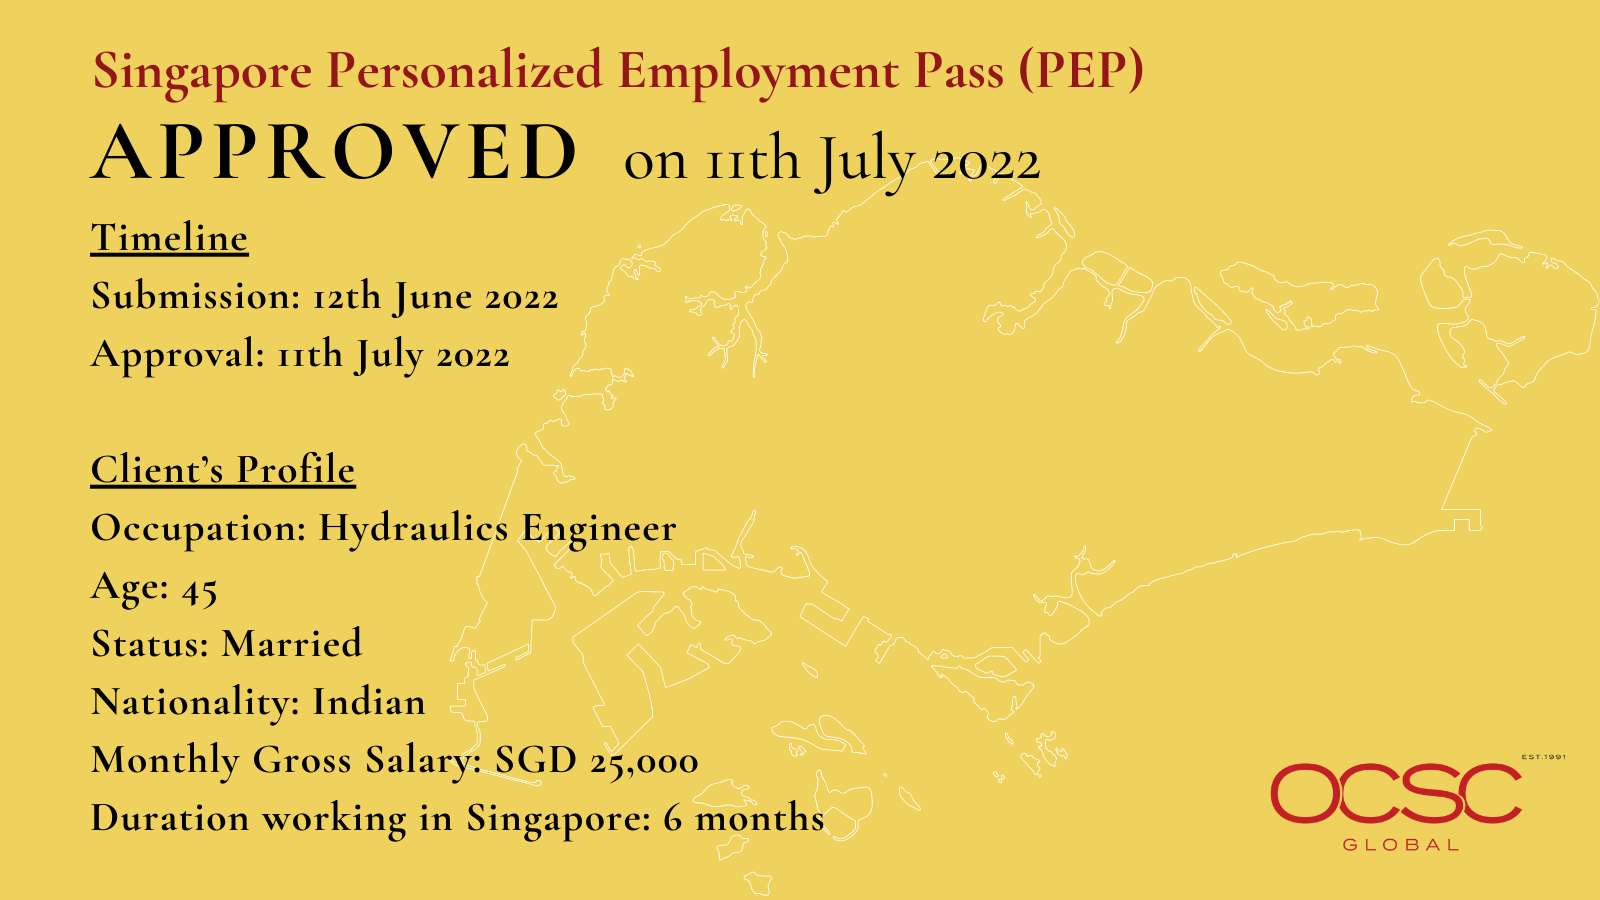 Approval for Singapore Personalized Employment Pass (PEP)